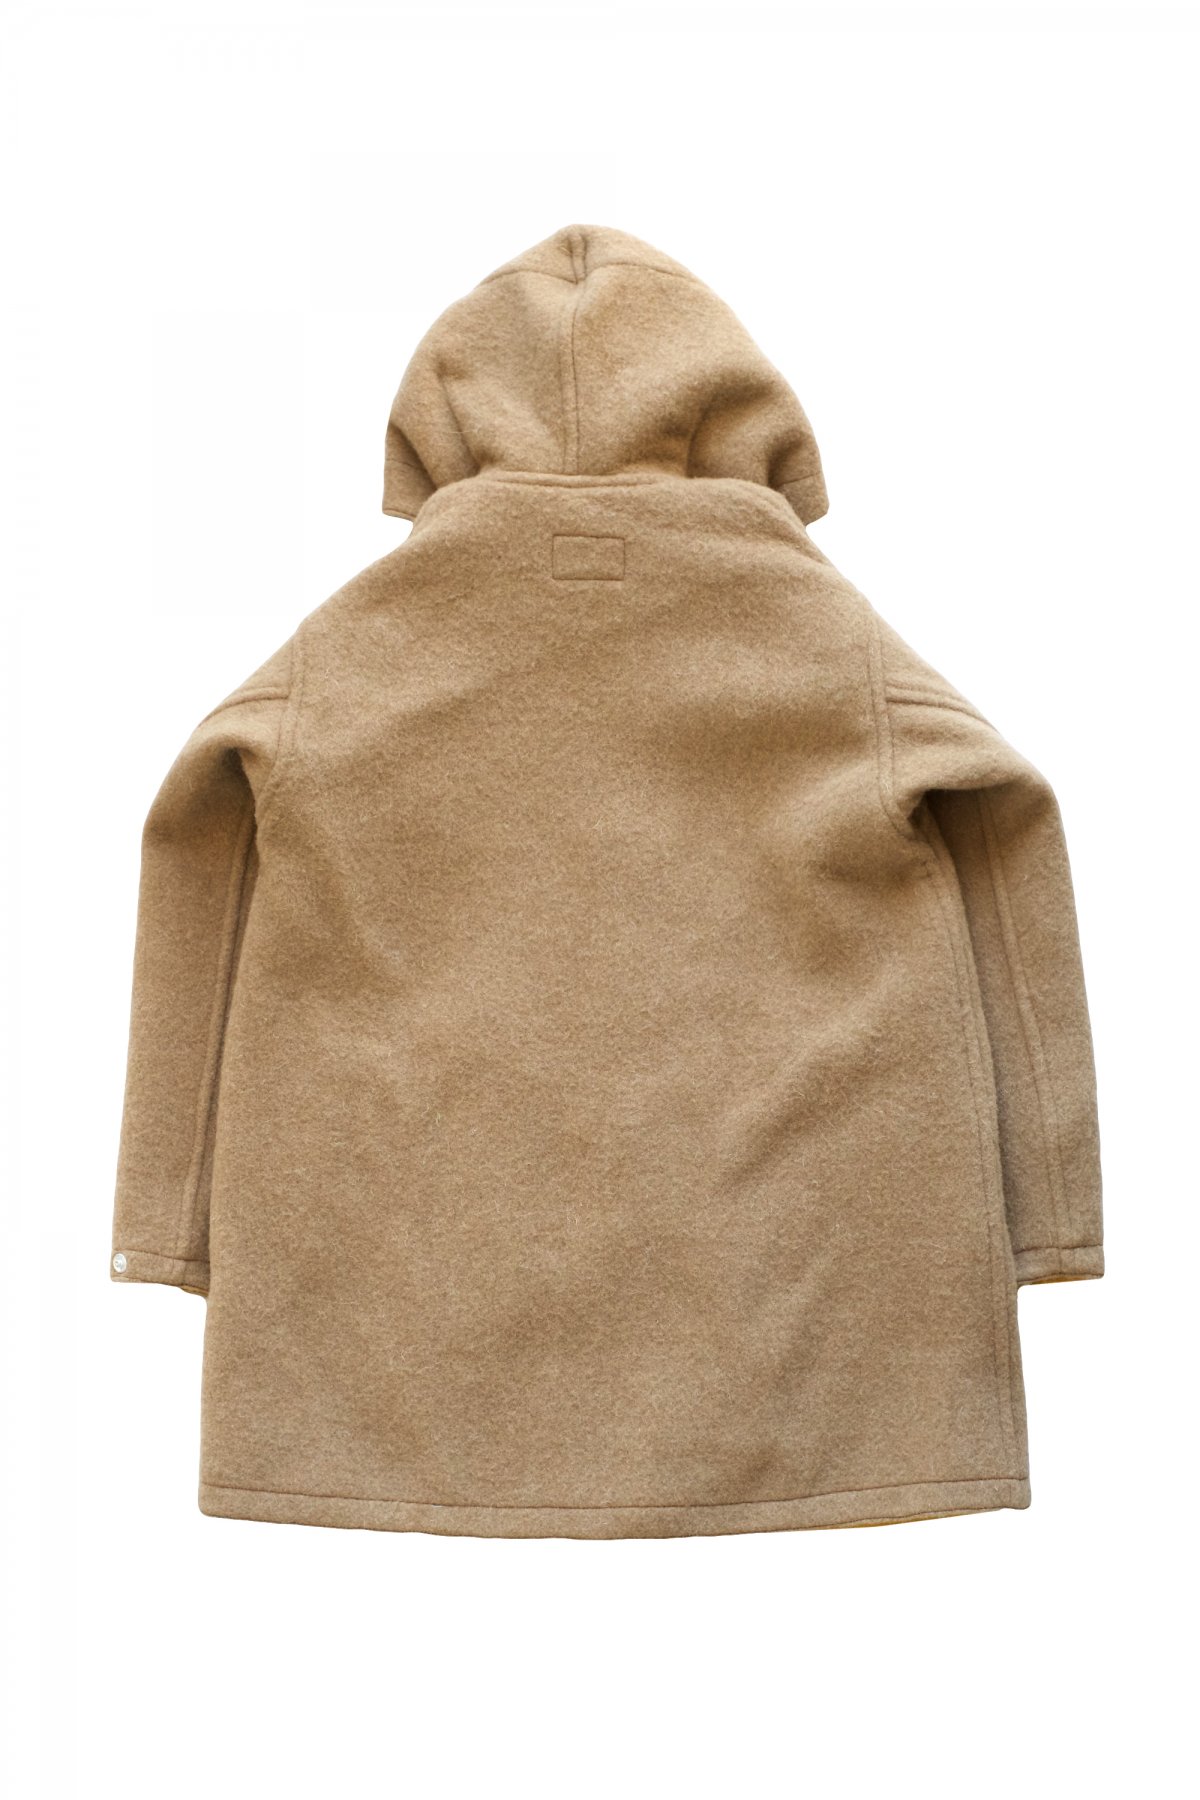 Nigel Cabourn ナイジェル・ケーボン 通販 正規店 フェートン - Phaeton Smart Clothes Online Store